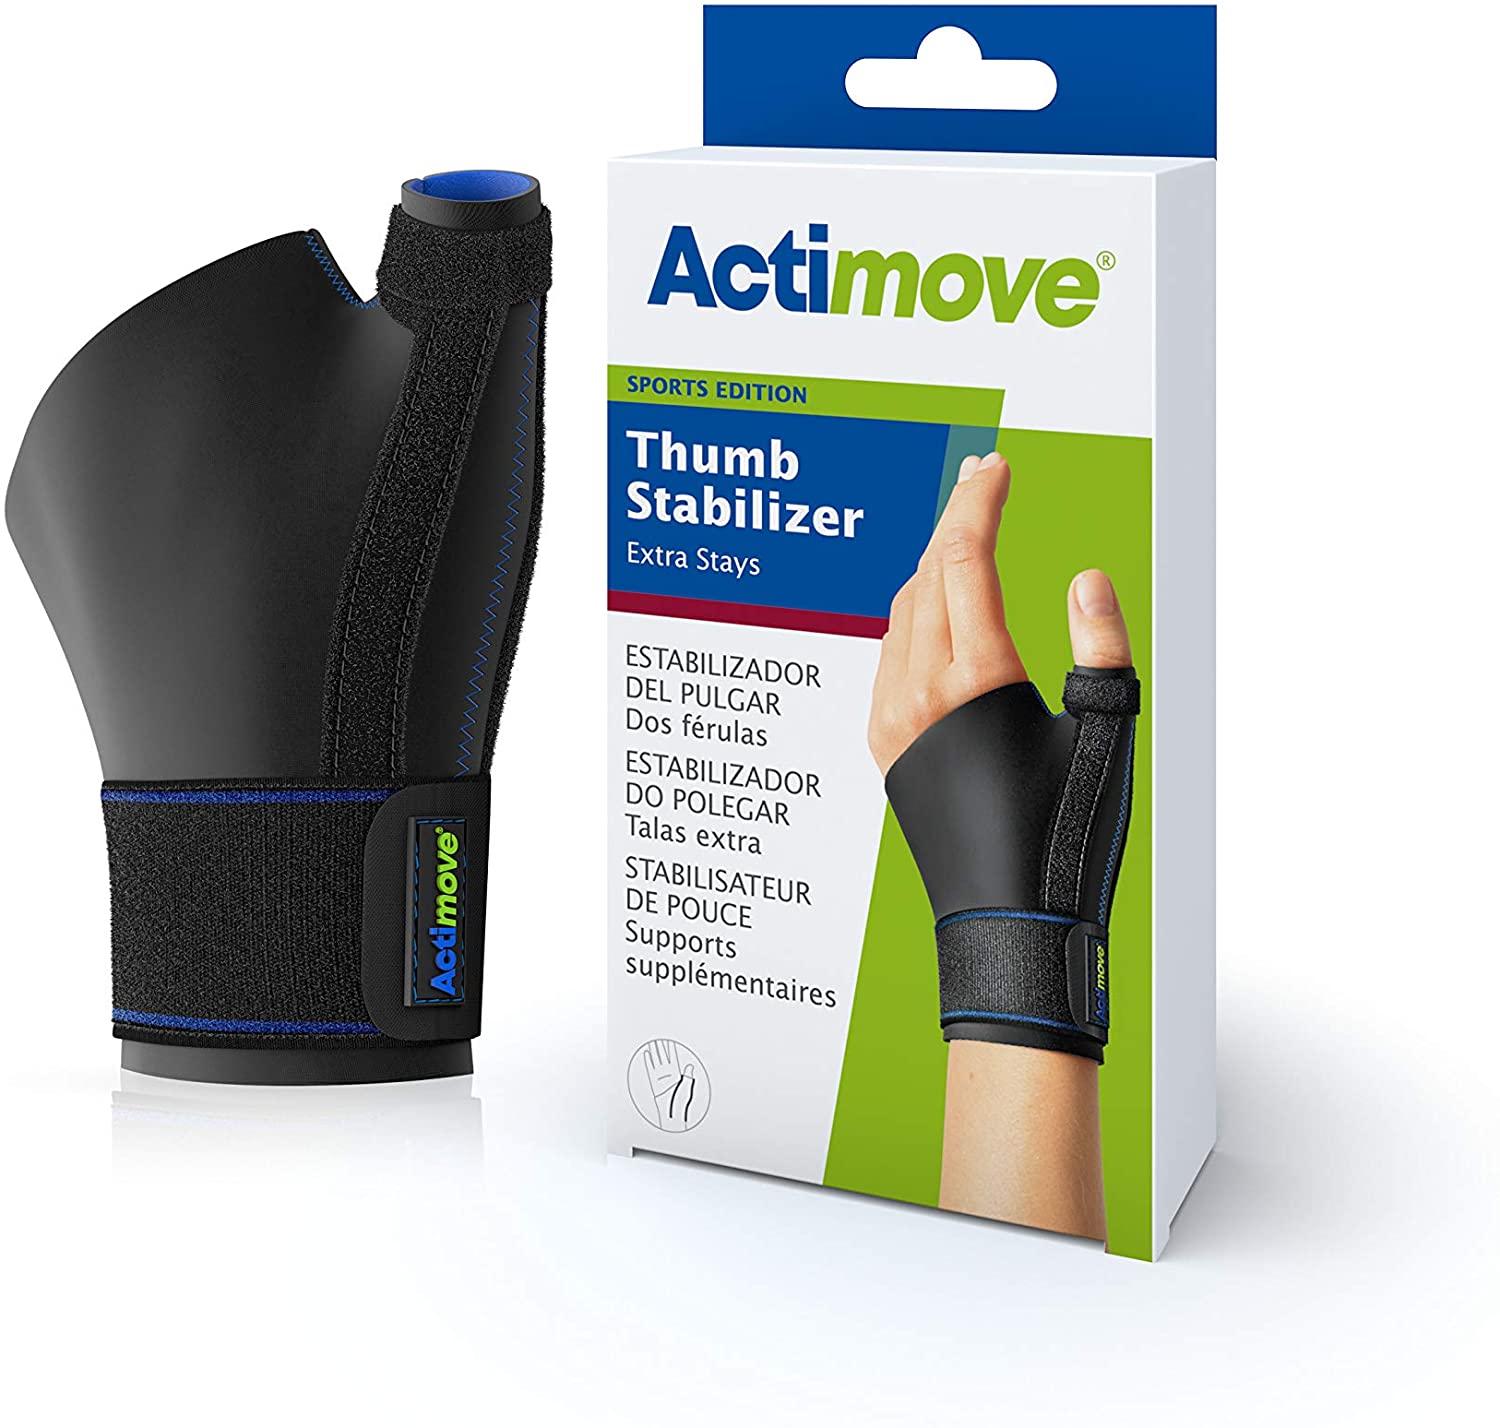 Protects the thumb with its lightweight, perforated outer shell, cool terry liner.